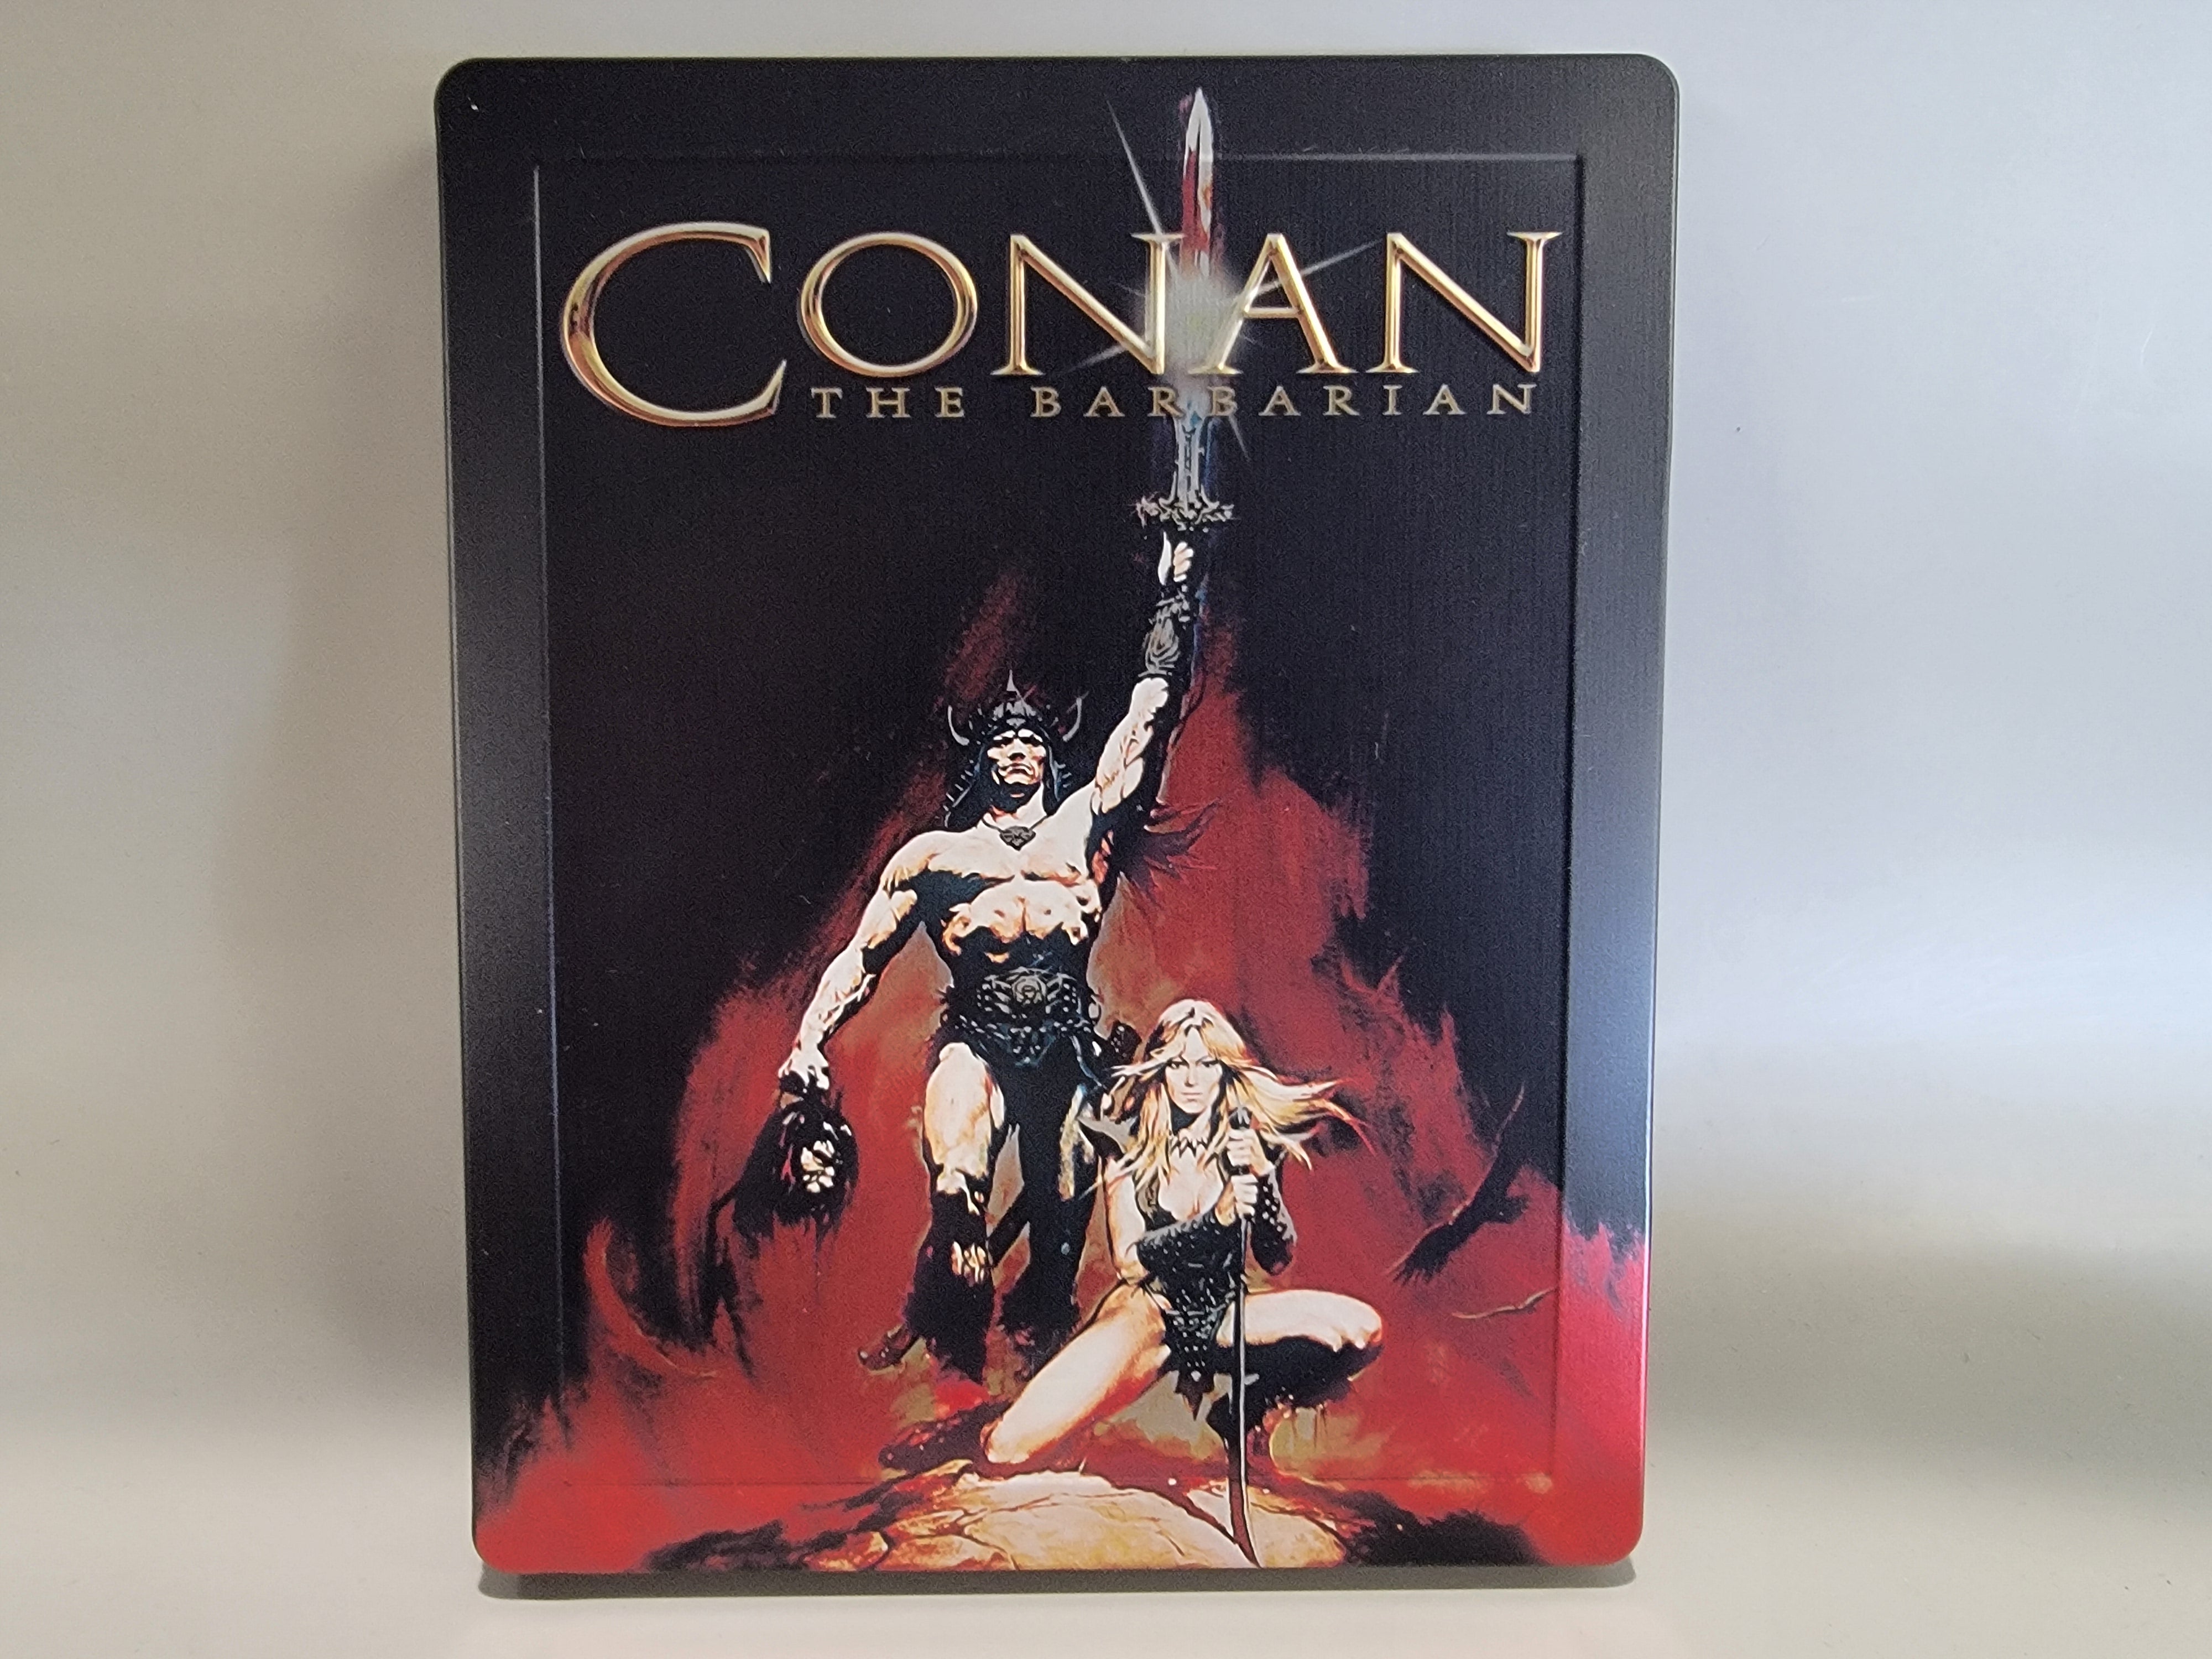 CONAN THE BARBARIAN (REGION FREE IMPORT - LIMITED EDITION) BLU-RAY STEELBOOK [USED]